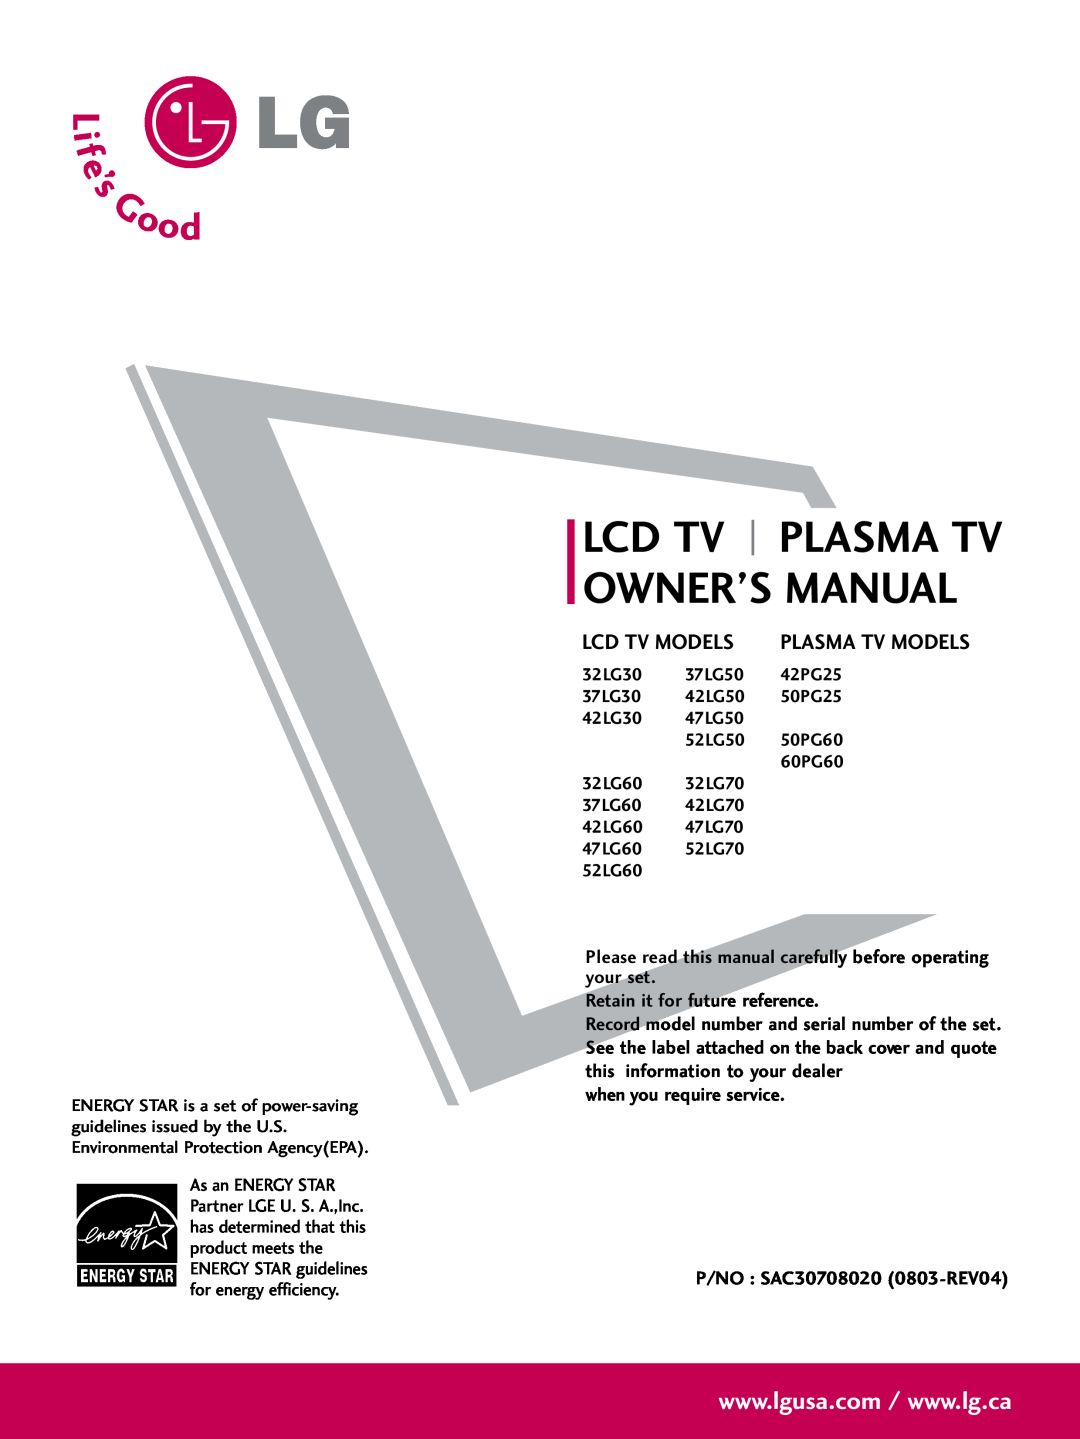 LG Electronics 5270, 60PG60 owner manual Plasma Tv Models, Lcd Tv Models, Retain it for future reference, Owner’S Manual 